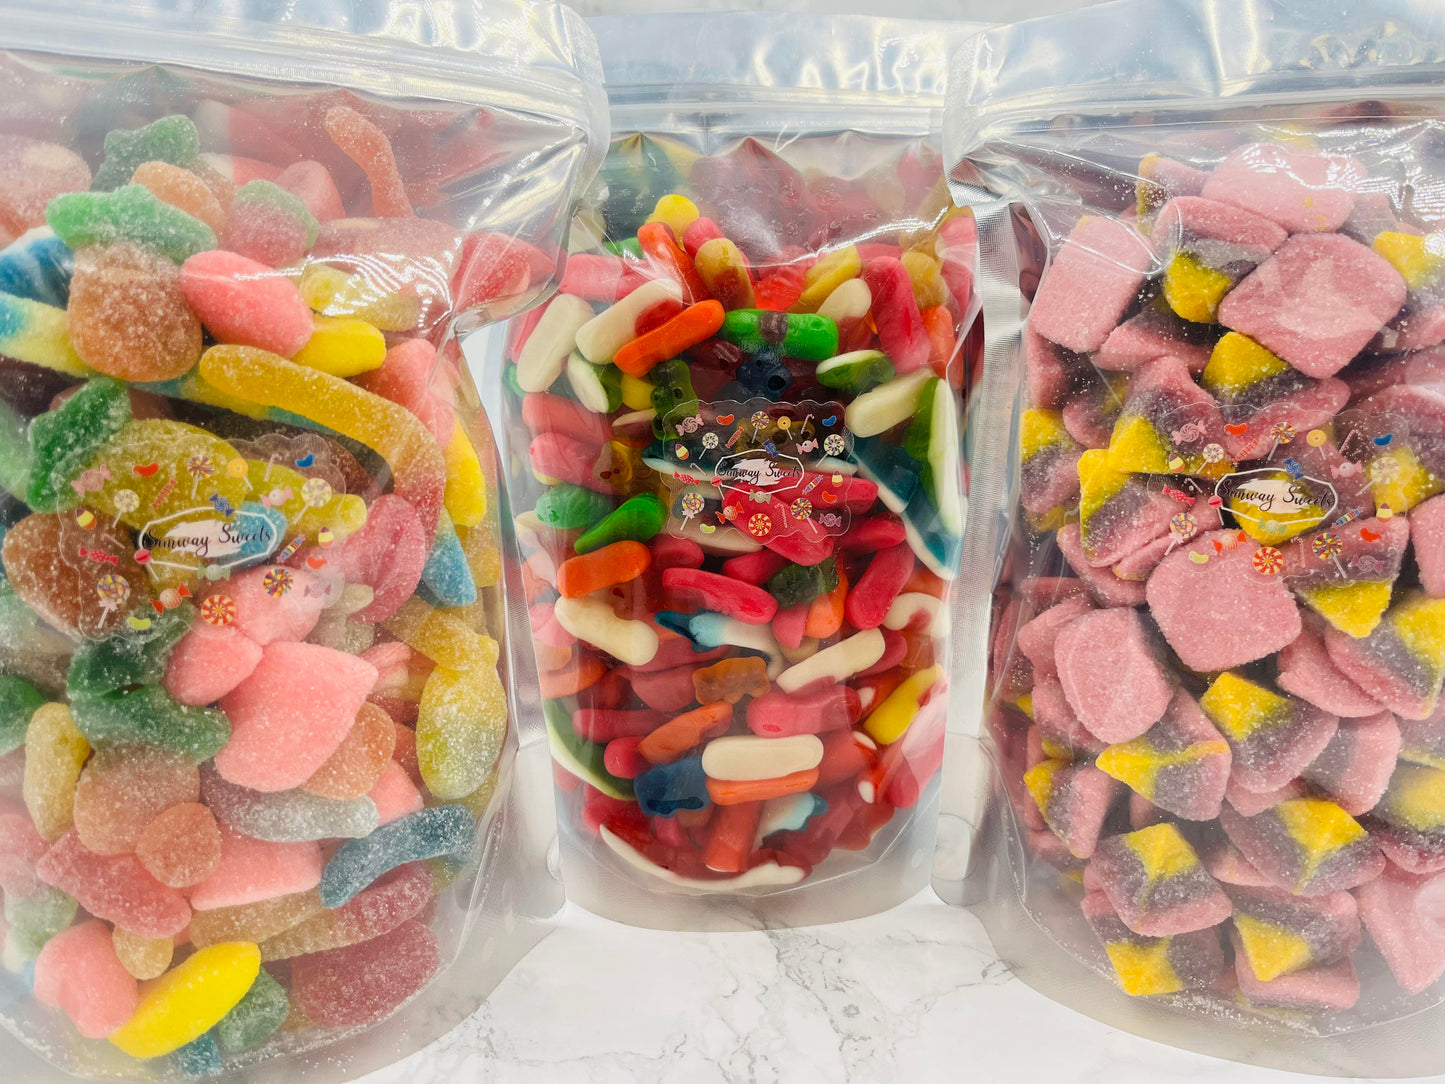 3 x 1KG Pick 'n' Mix Bags brought to you by Simway Sweets!